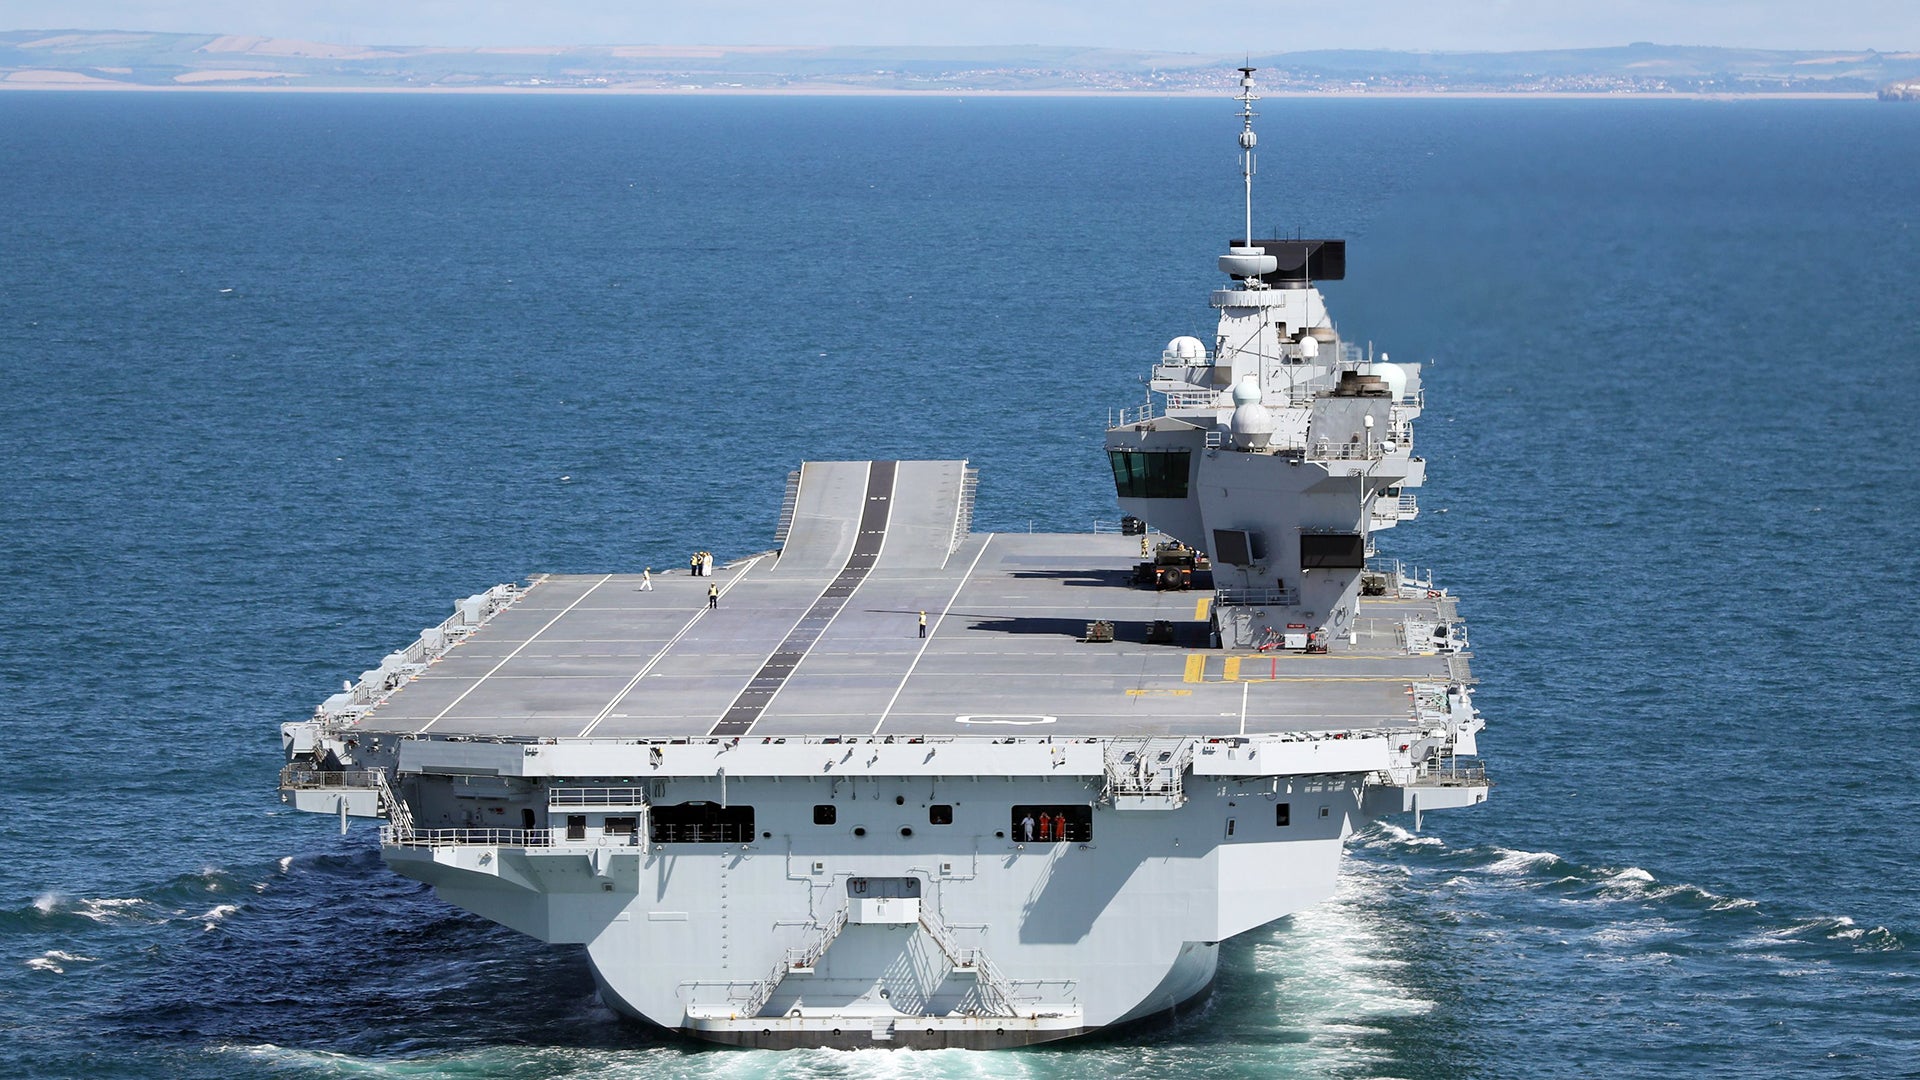 Queen Elizabeth Class Carriers Have Woefully Inadequate Close-In Air Defense Capabilities